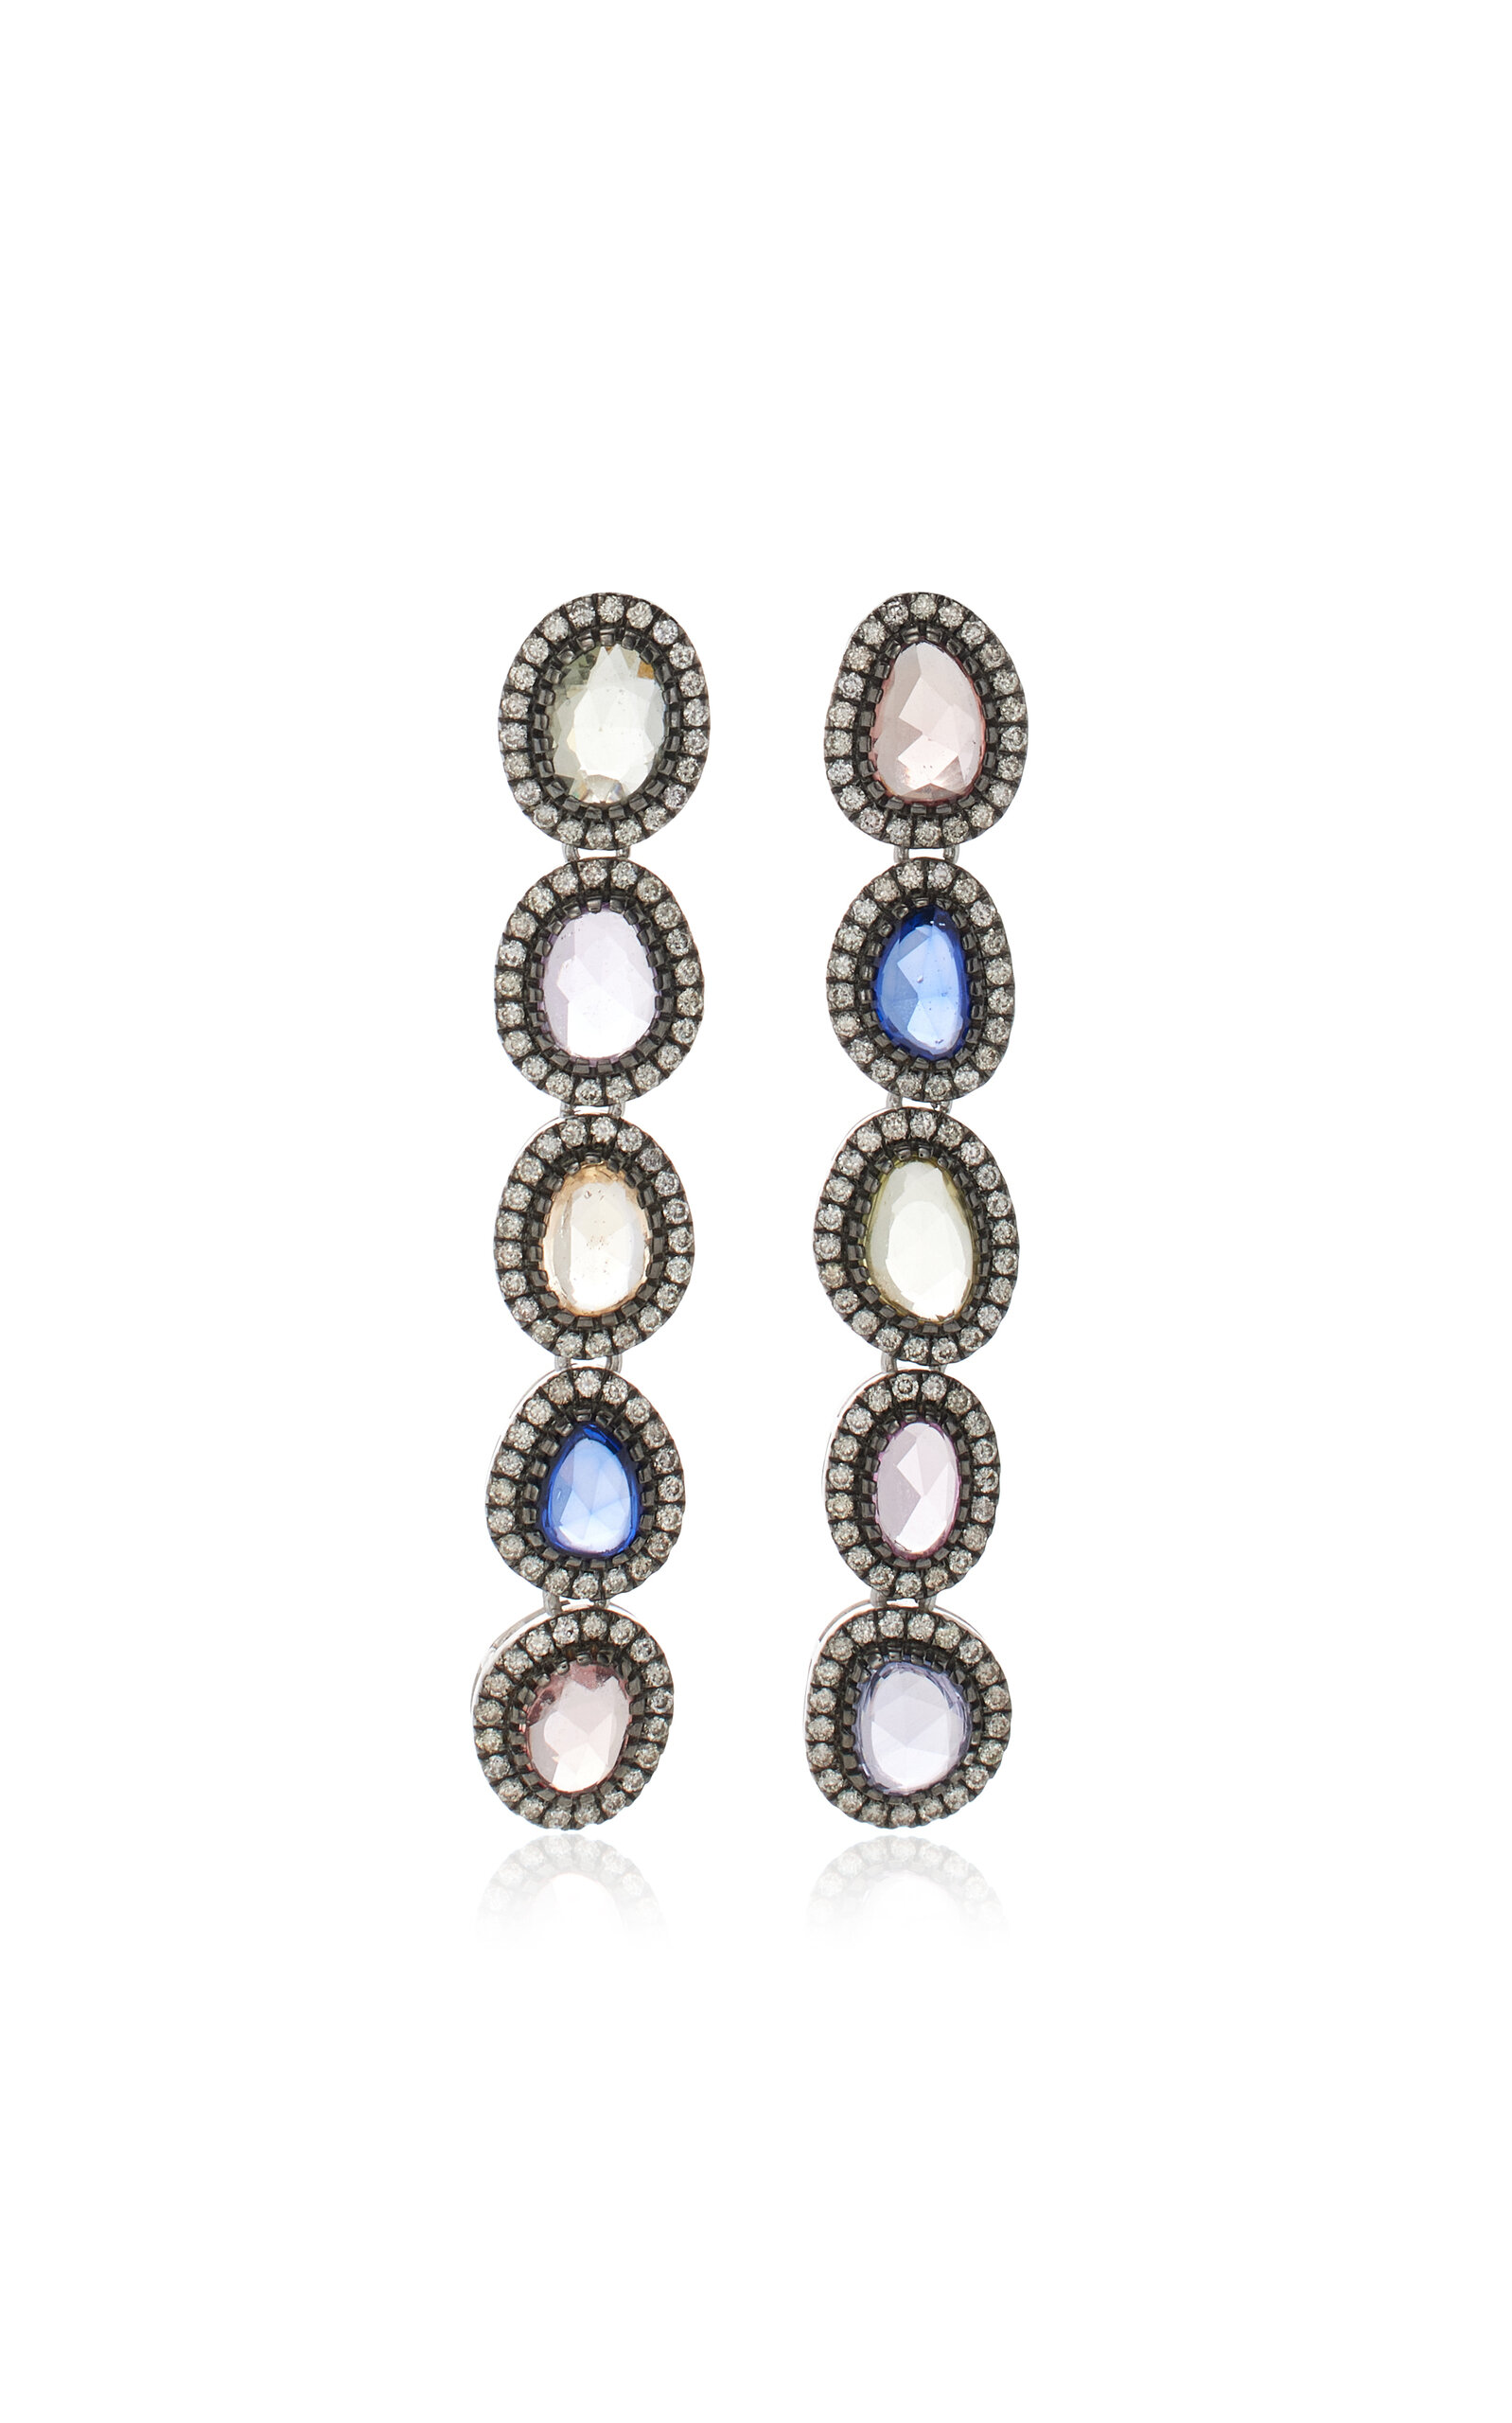 One-of-a-Kind Midnight Blossom 18K White Gold Sapphire Earrings